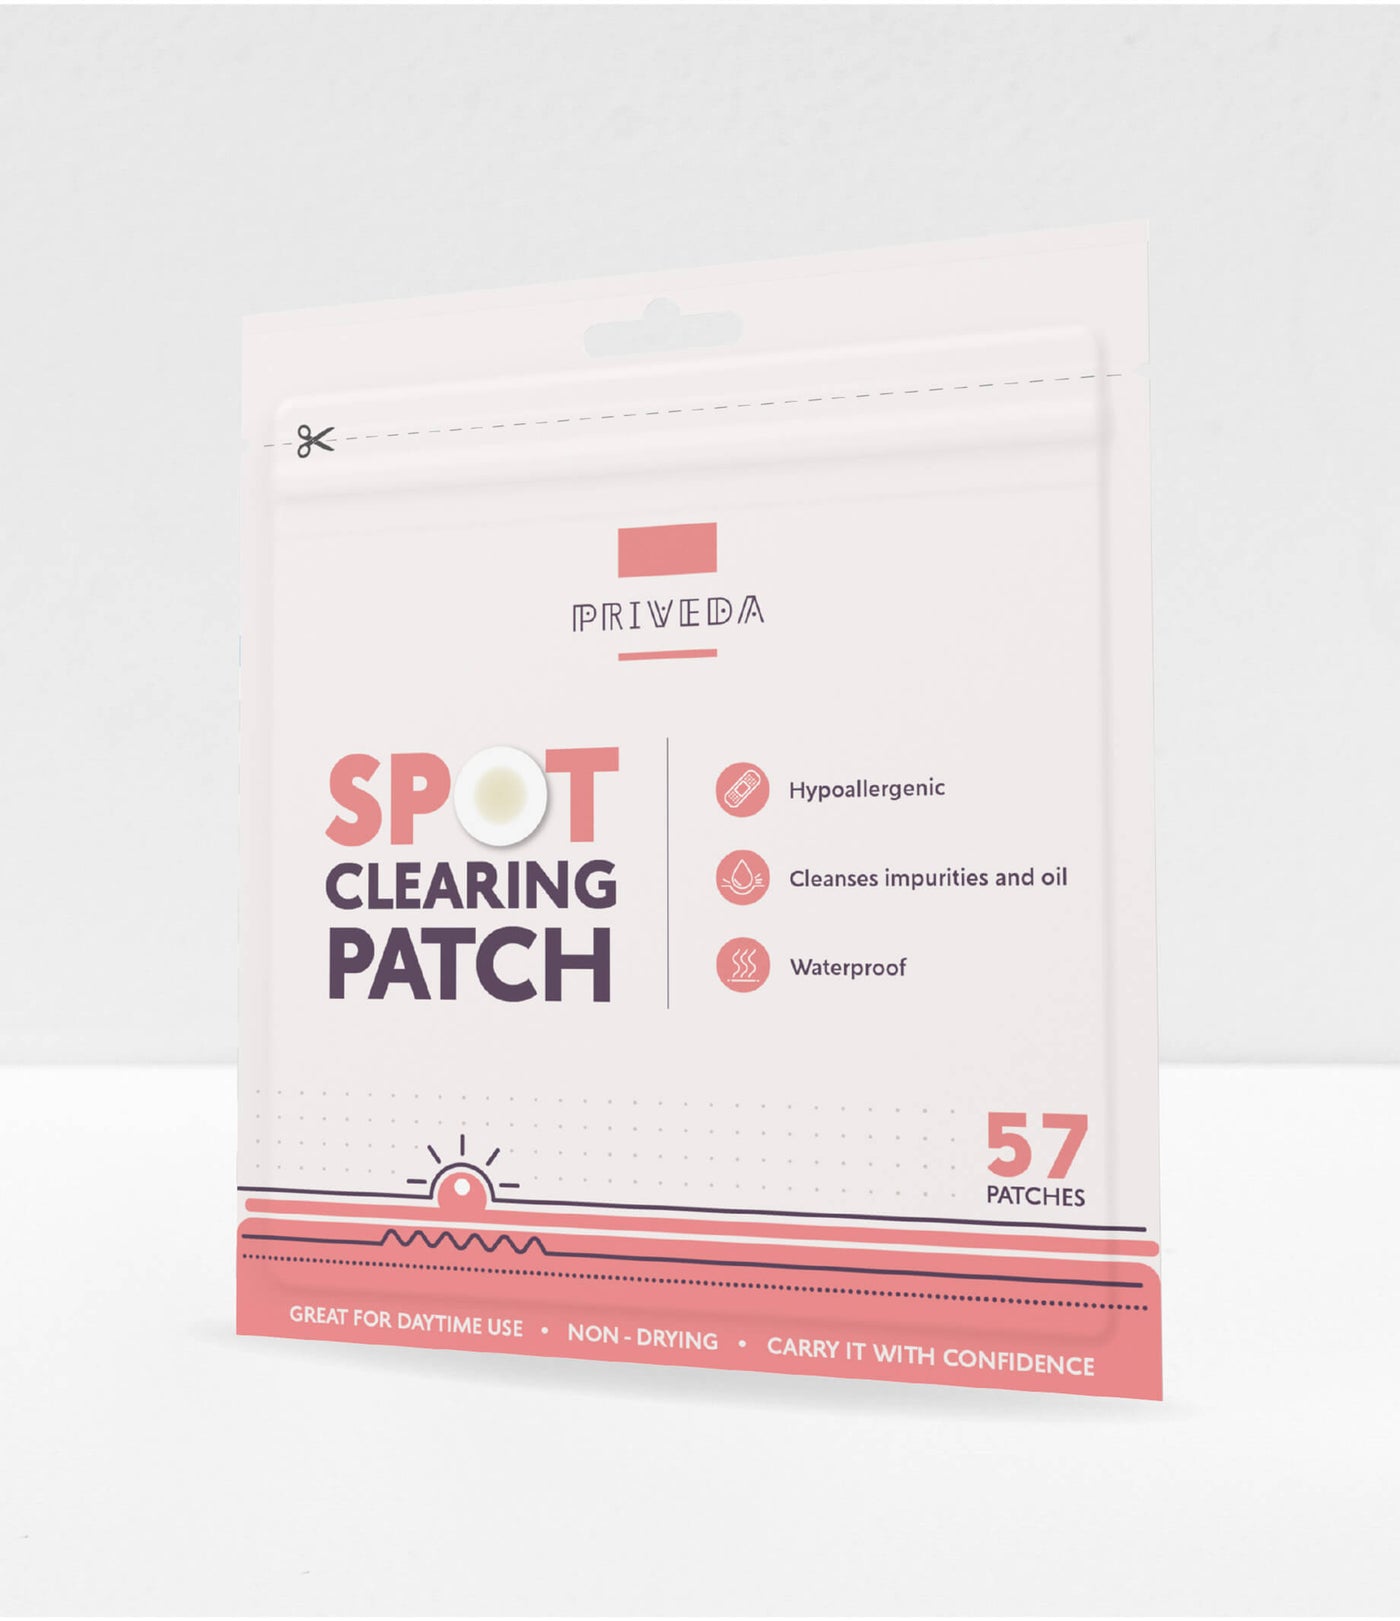 Spot Clearing Patch